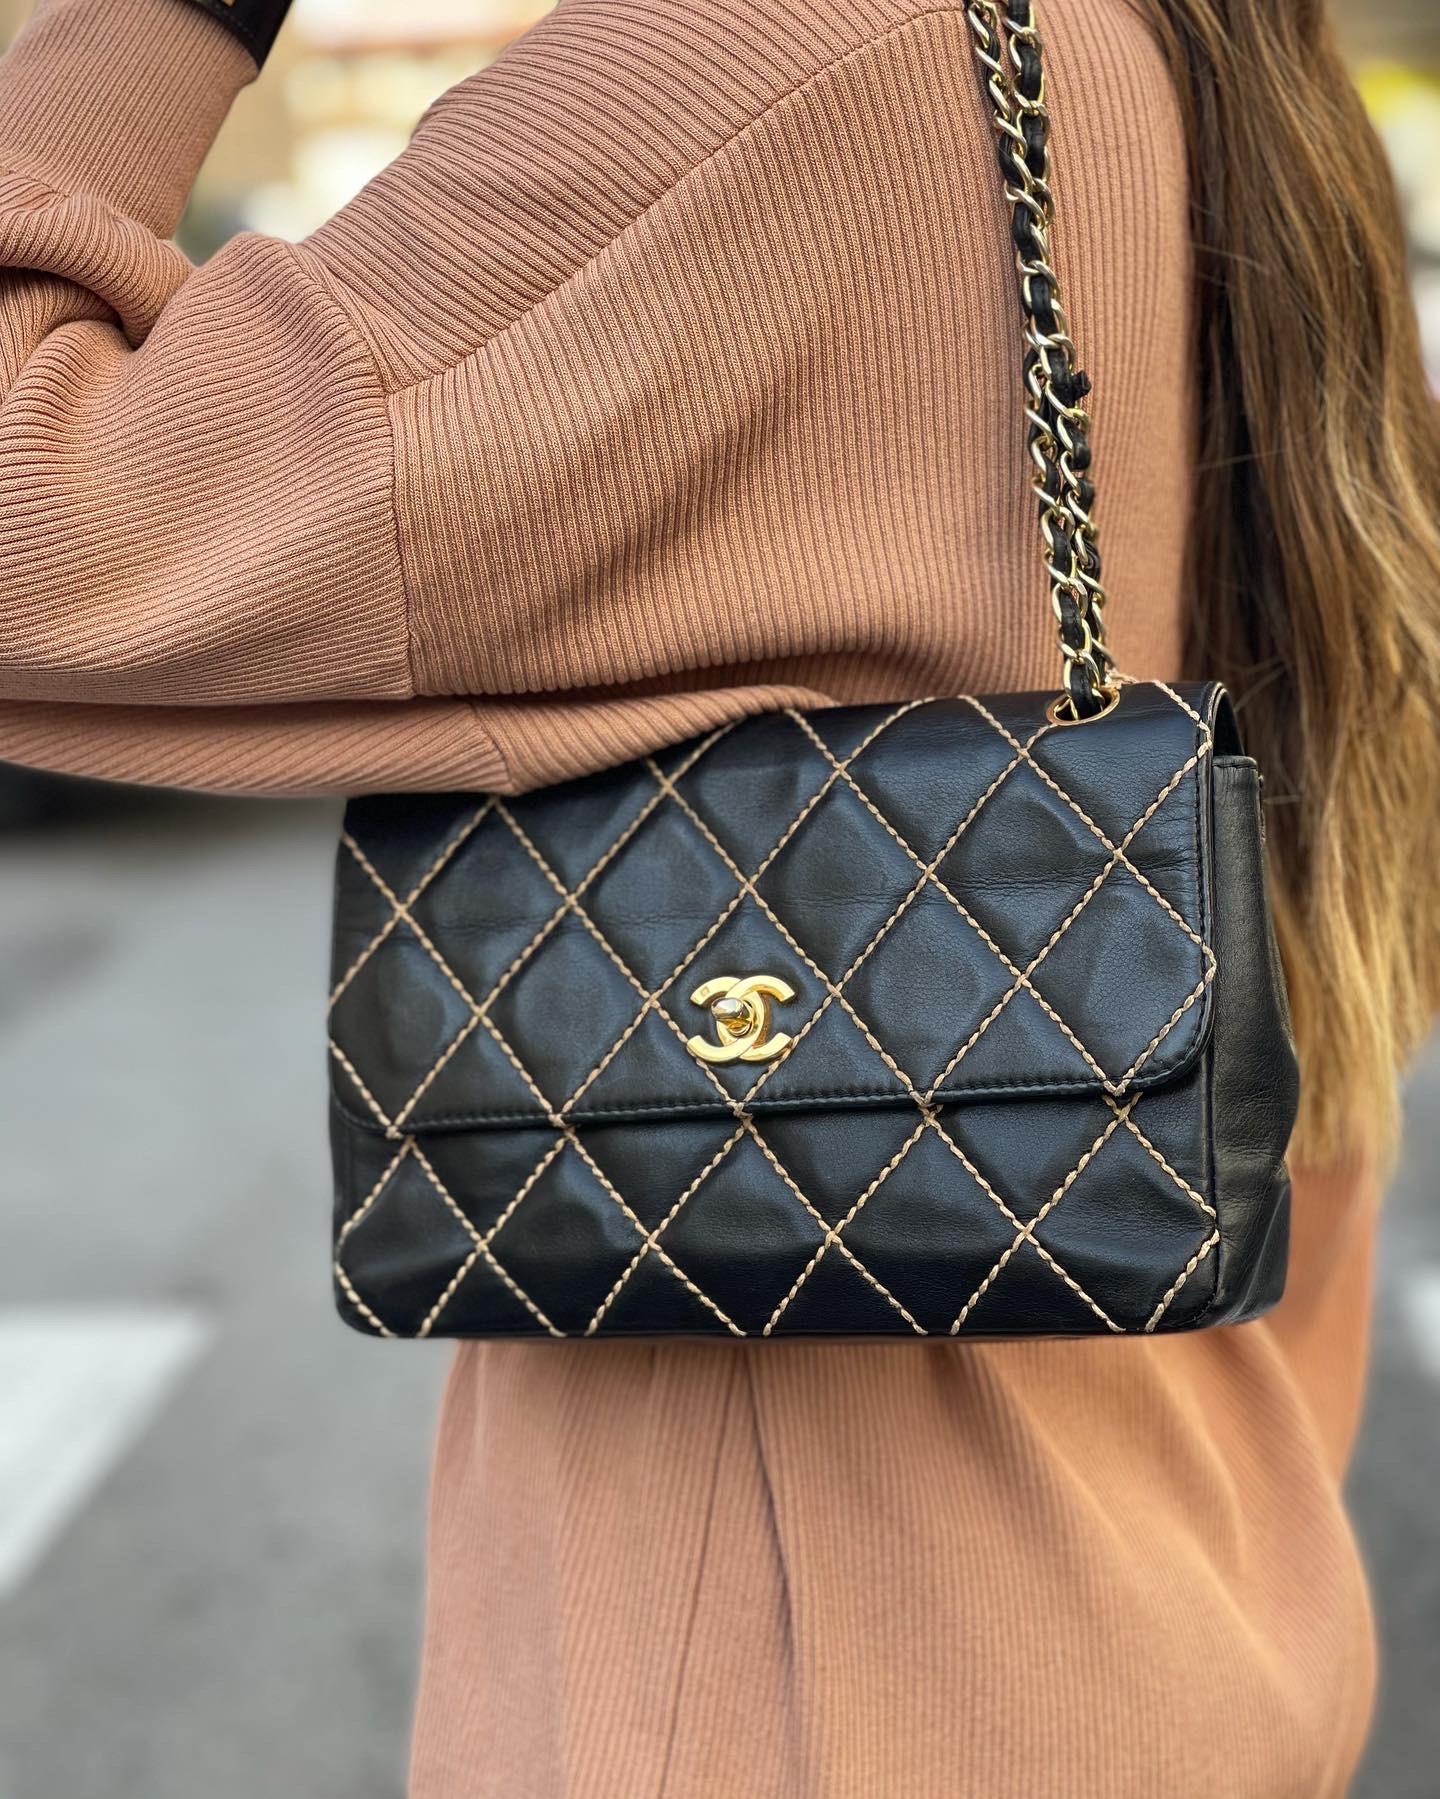 Chanel bag crafted in black leather with beige contrast stitching and gold hardware. Closure with classic CC logo, internally quite large and equipped with pockets. The bag is equipped with a leather shoulder strap and sliding chain. To be a product